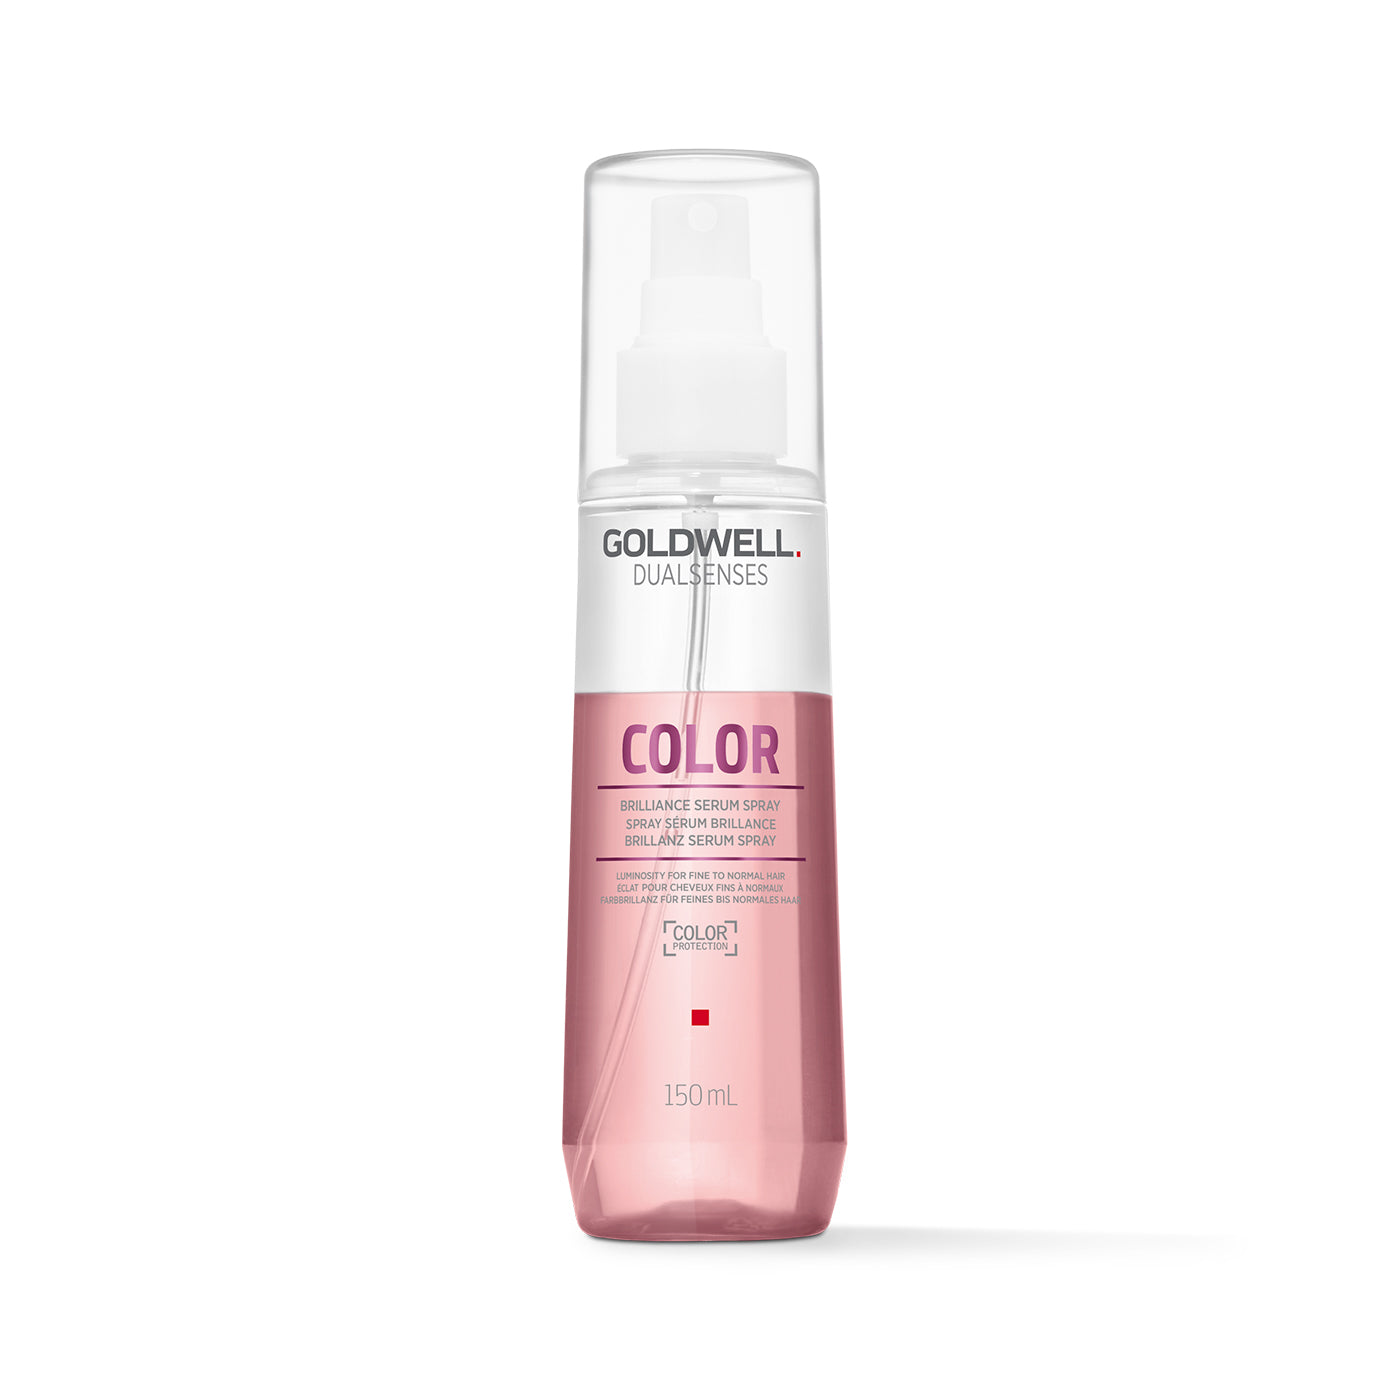 Goldwell DualSenses Color Brilliance Serum Spray (150ml) - Ultimate Hair and Beauty